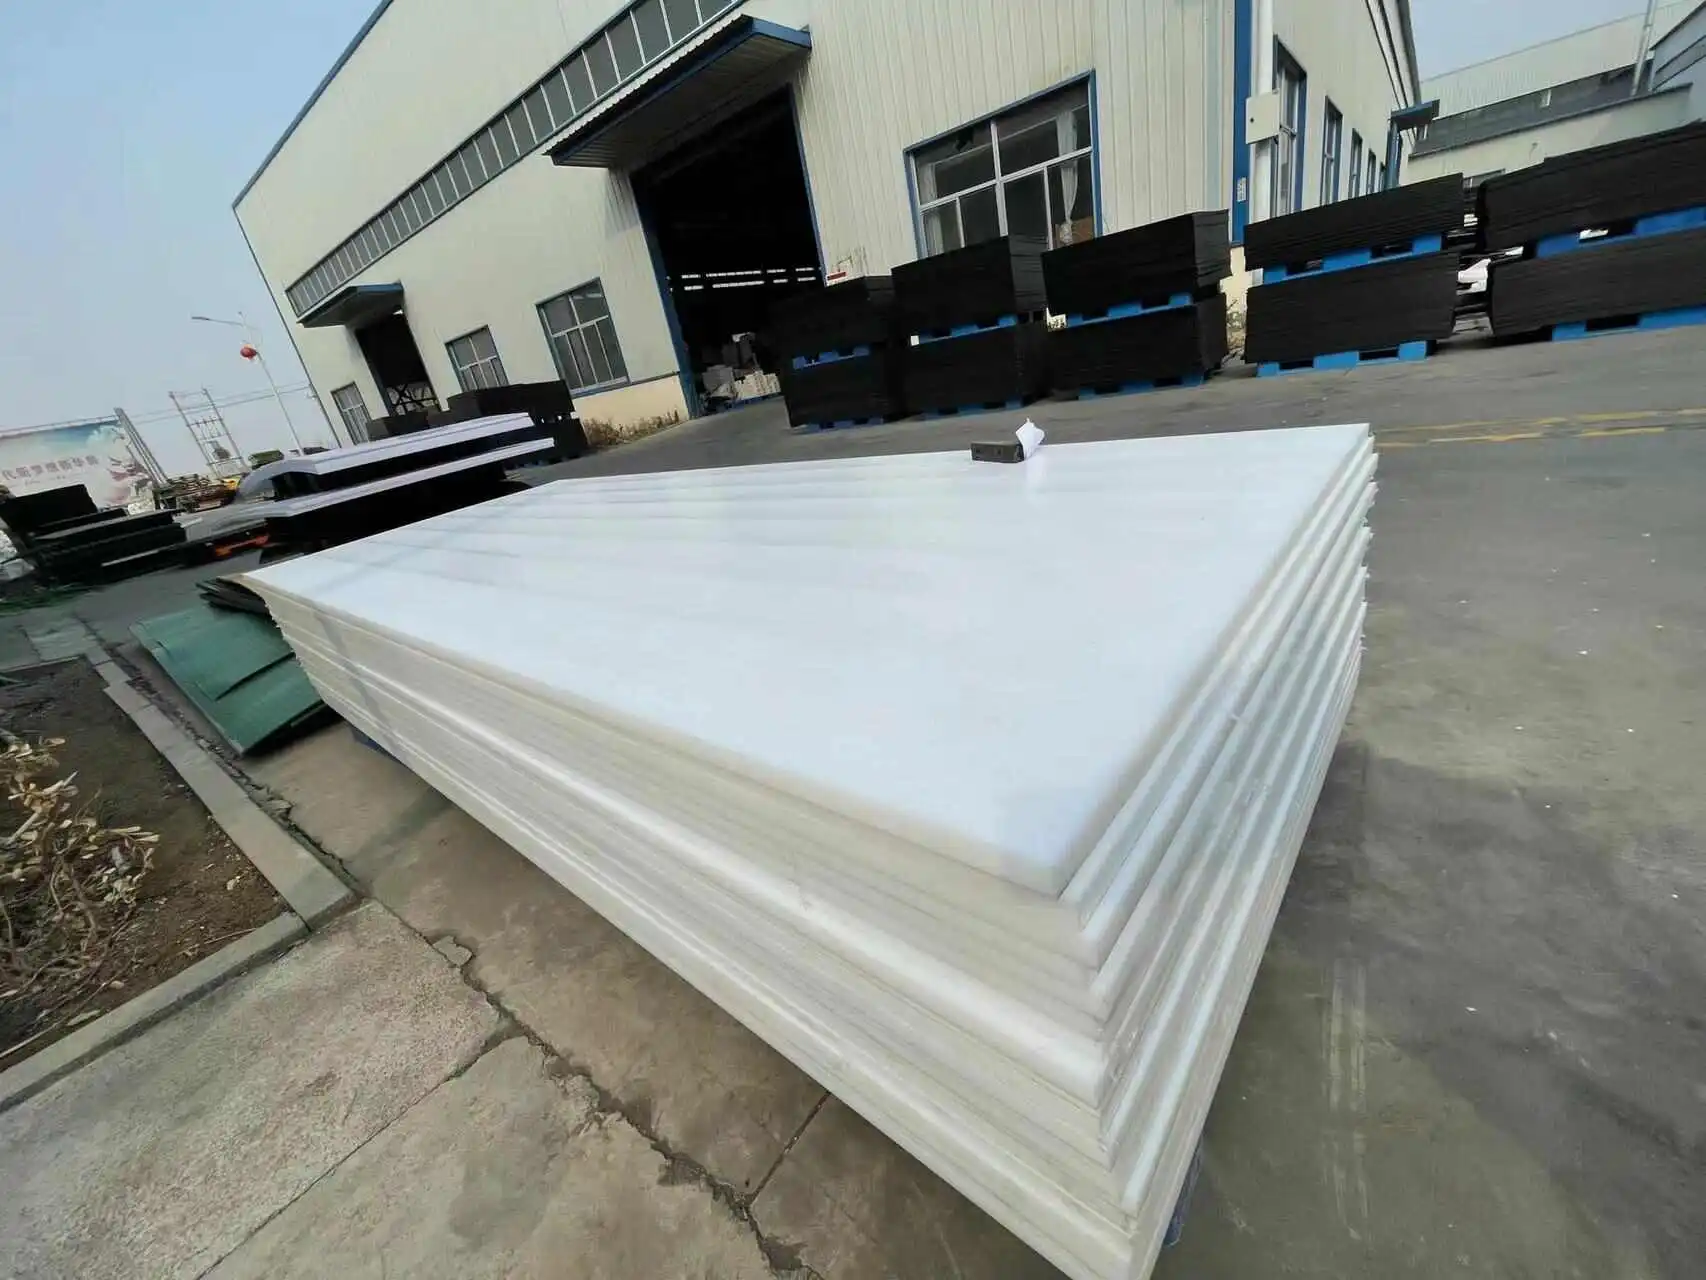 Colored UHMWPE Sheet